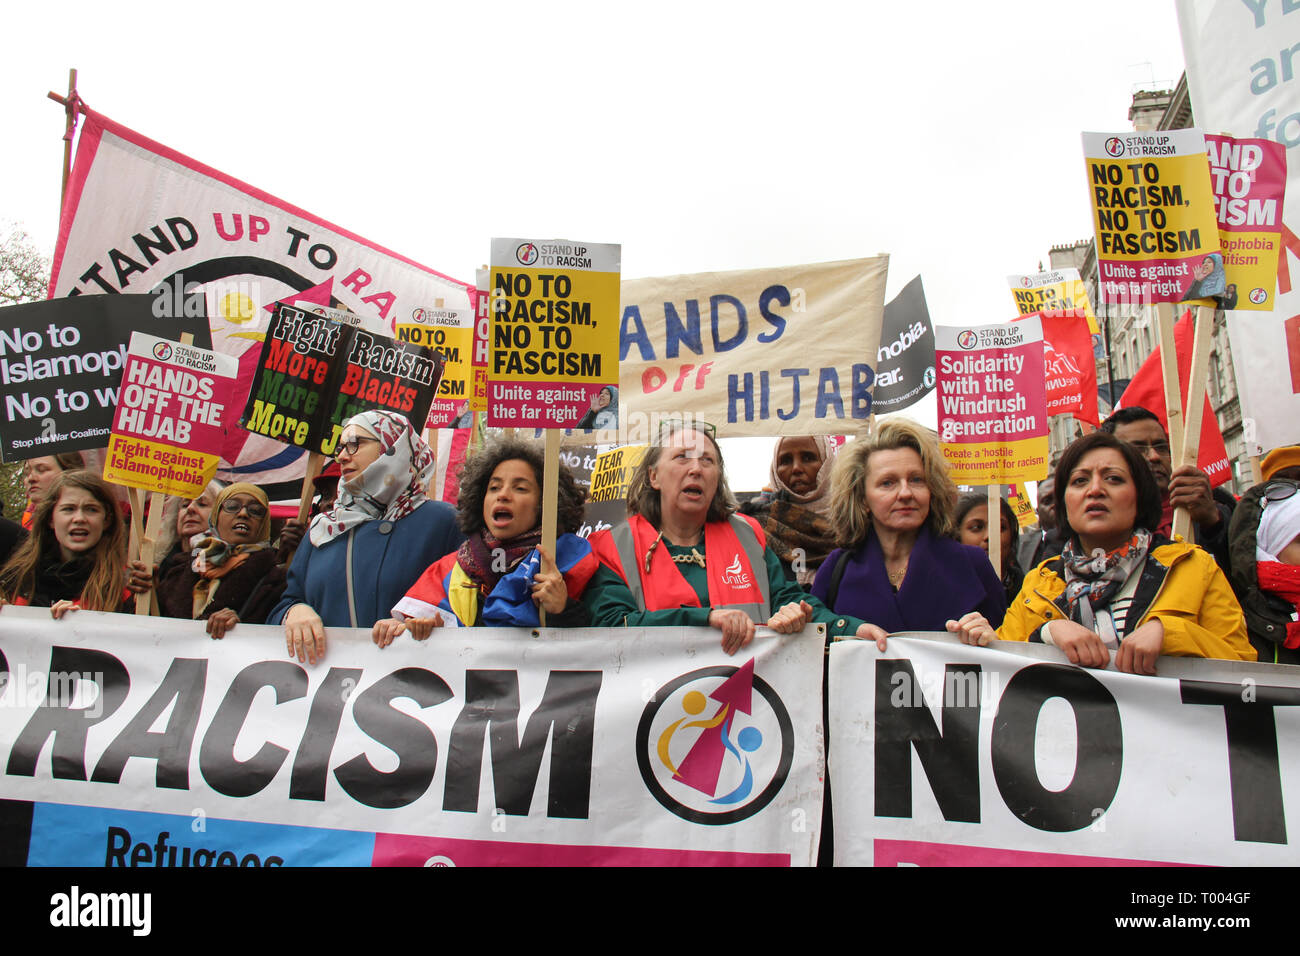 London, UK - 16 March 2019: Thousands of people took part in the UN Anti-Racism Day demonstration that took place in central London on 16 March. The demonstration which began in Park Lank and ended outside Downing Street was organised by Stand Up to Racism and Love Music Hate Racism and supported by the TUC and UNISON. Photo: David Mbiyu Stock Photo